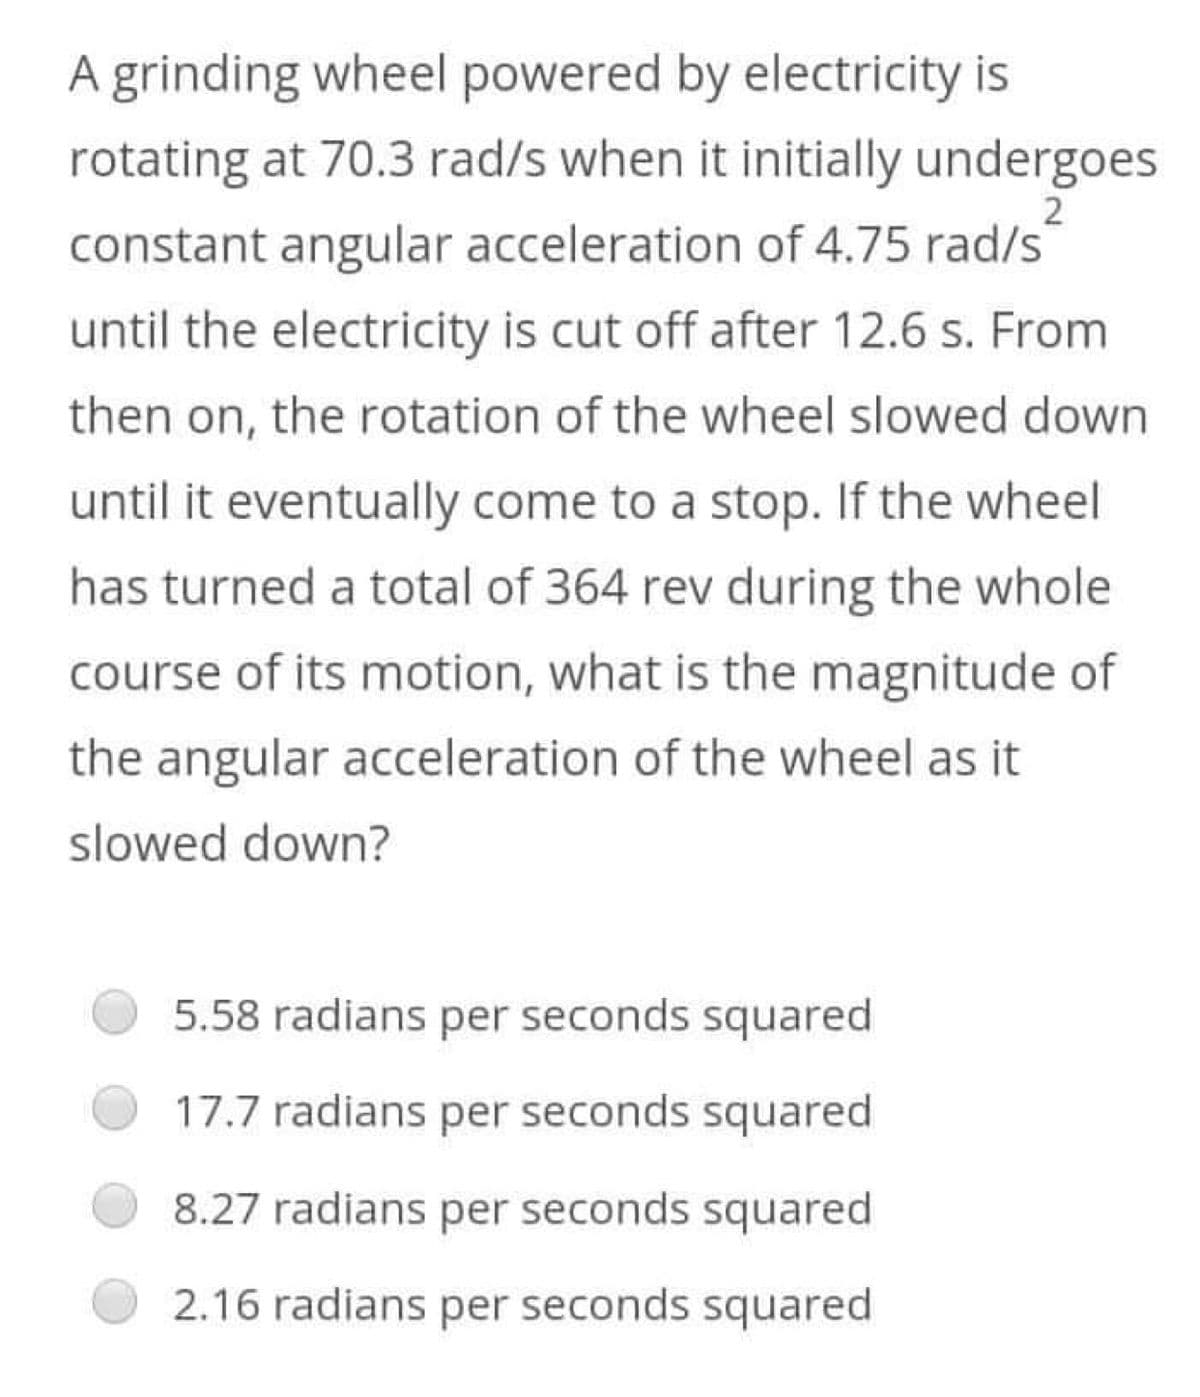 2
A grinding wheel powered by electricity is
rotating at 70.3 rad/s when it initially undergoes
constant angular acceleration of 4.75 rad/s
until the electricity is cut off after 12.6 s. From
then on, the rotation of the wheel slowed down
until it eventually come to a stop. If the wheel
has turned a total of 364 rev during the whole
course of its motion, what is the magnitude of
the angular acceleration of the wheel as it
slowed down?
5.58 radians per seconds squared
17.7 radians per seconds squared
8.27 radians per seconds squared
2.16 radians per seconds squared